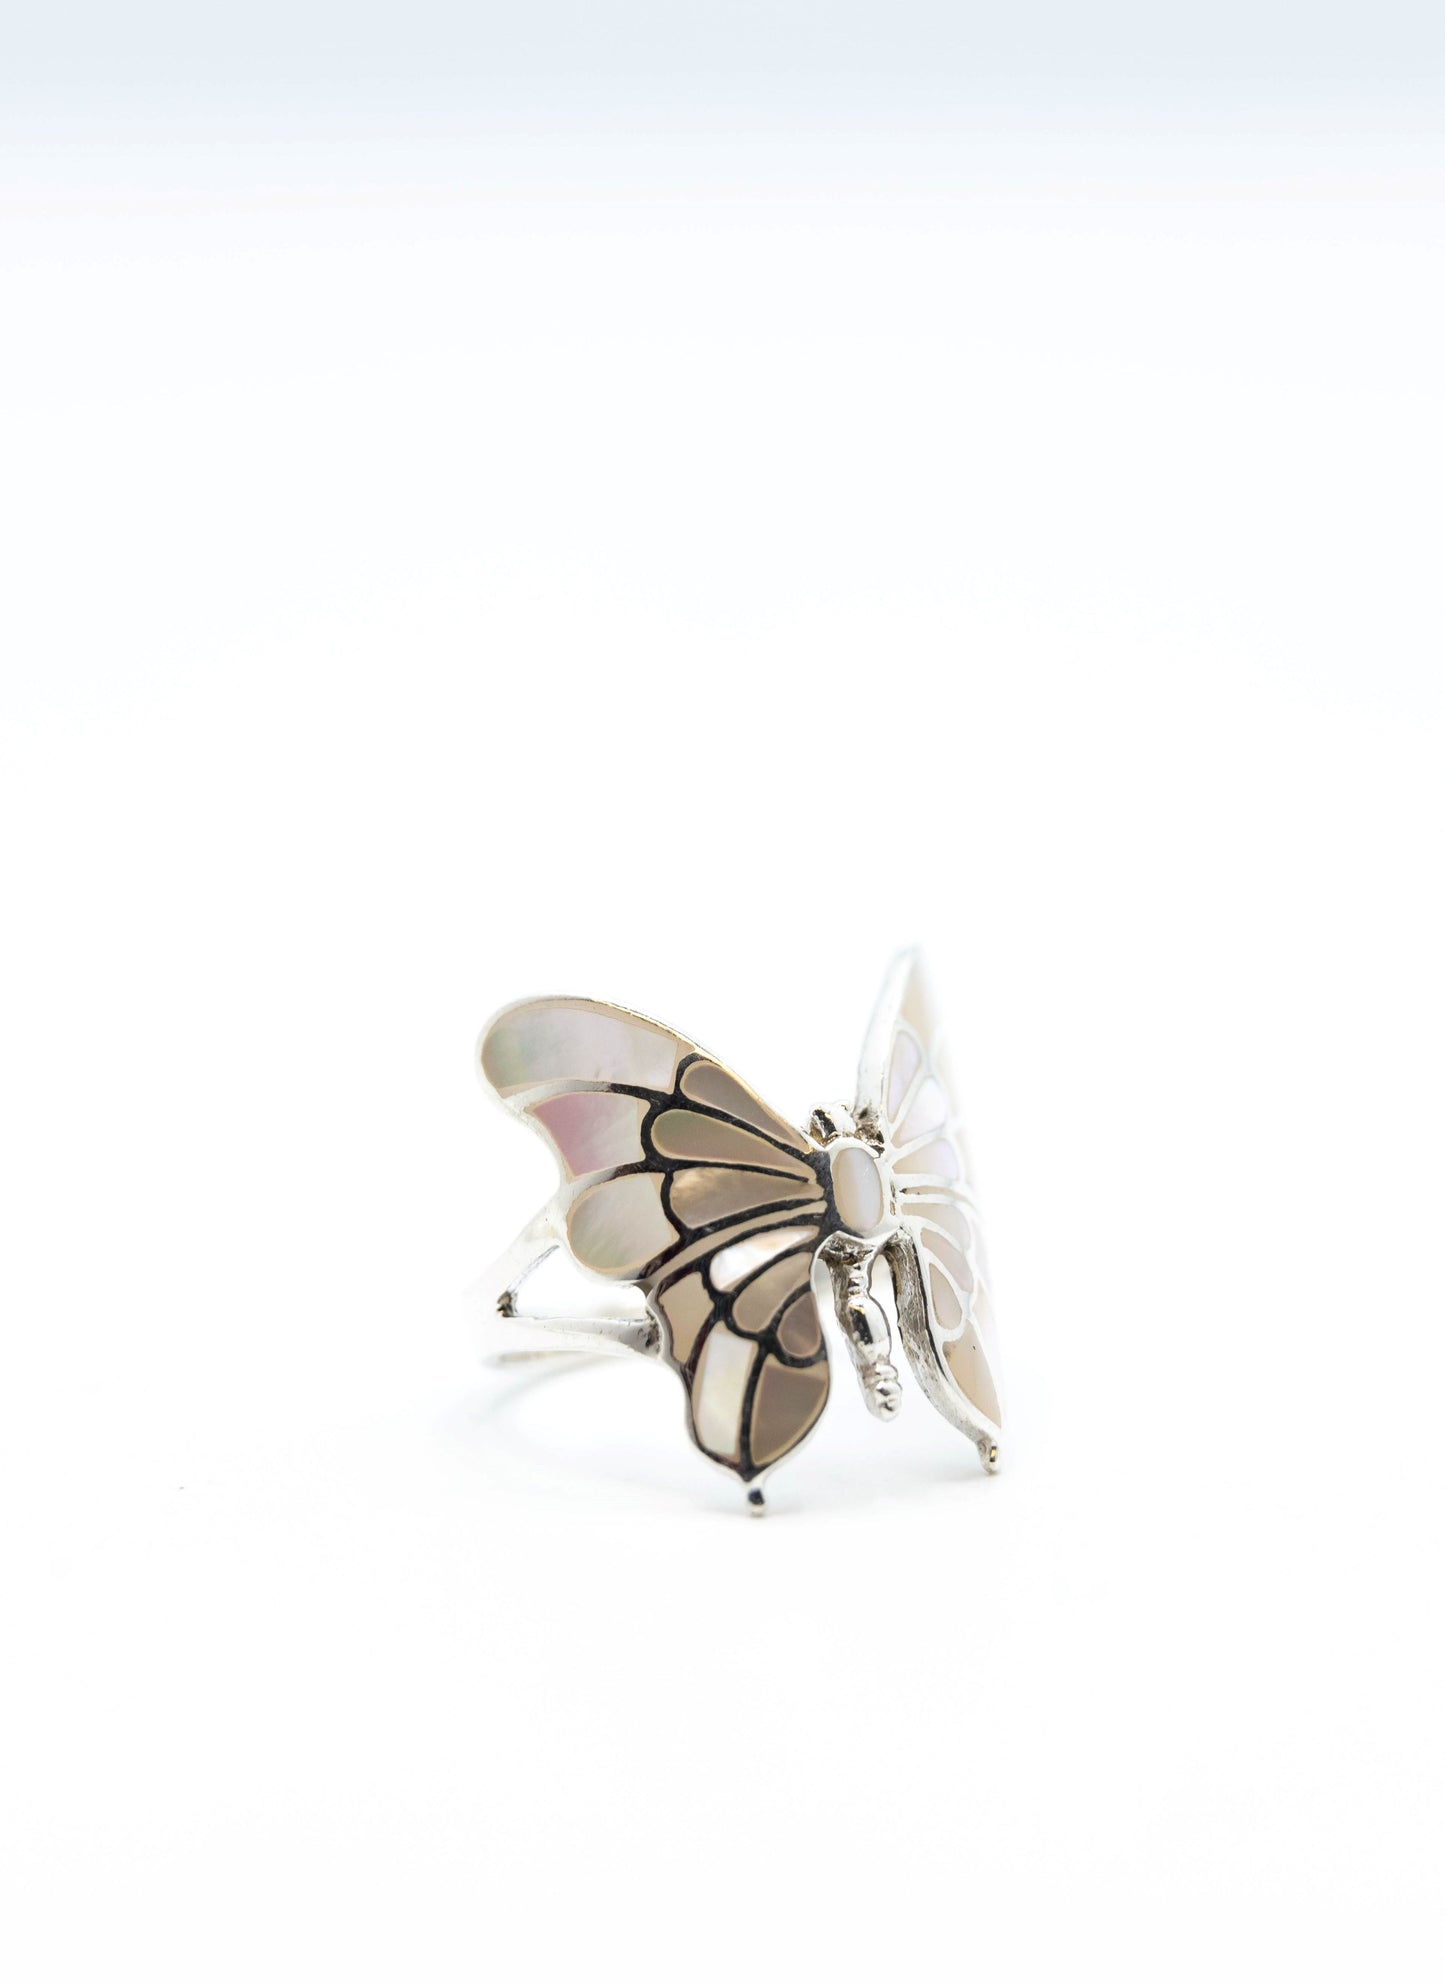 Pearl Petals Butterfly Ring .925